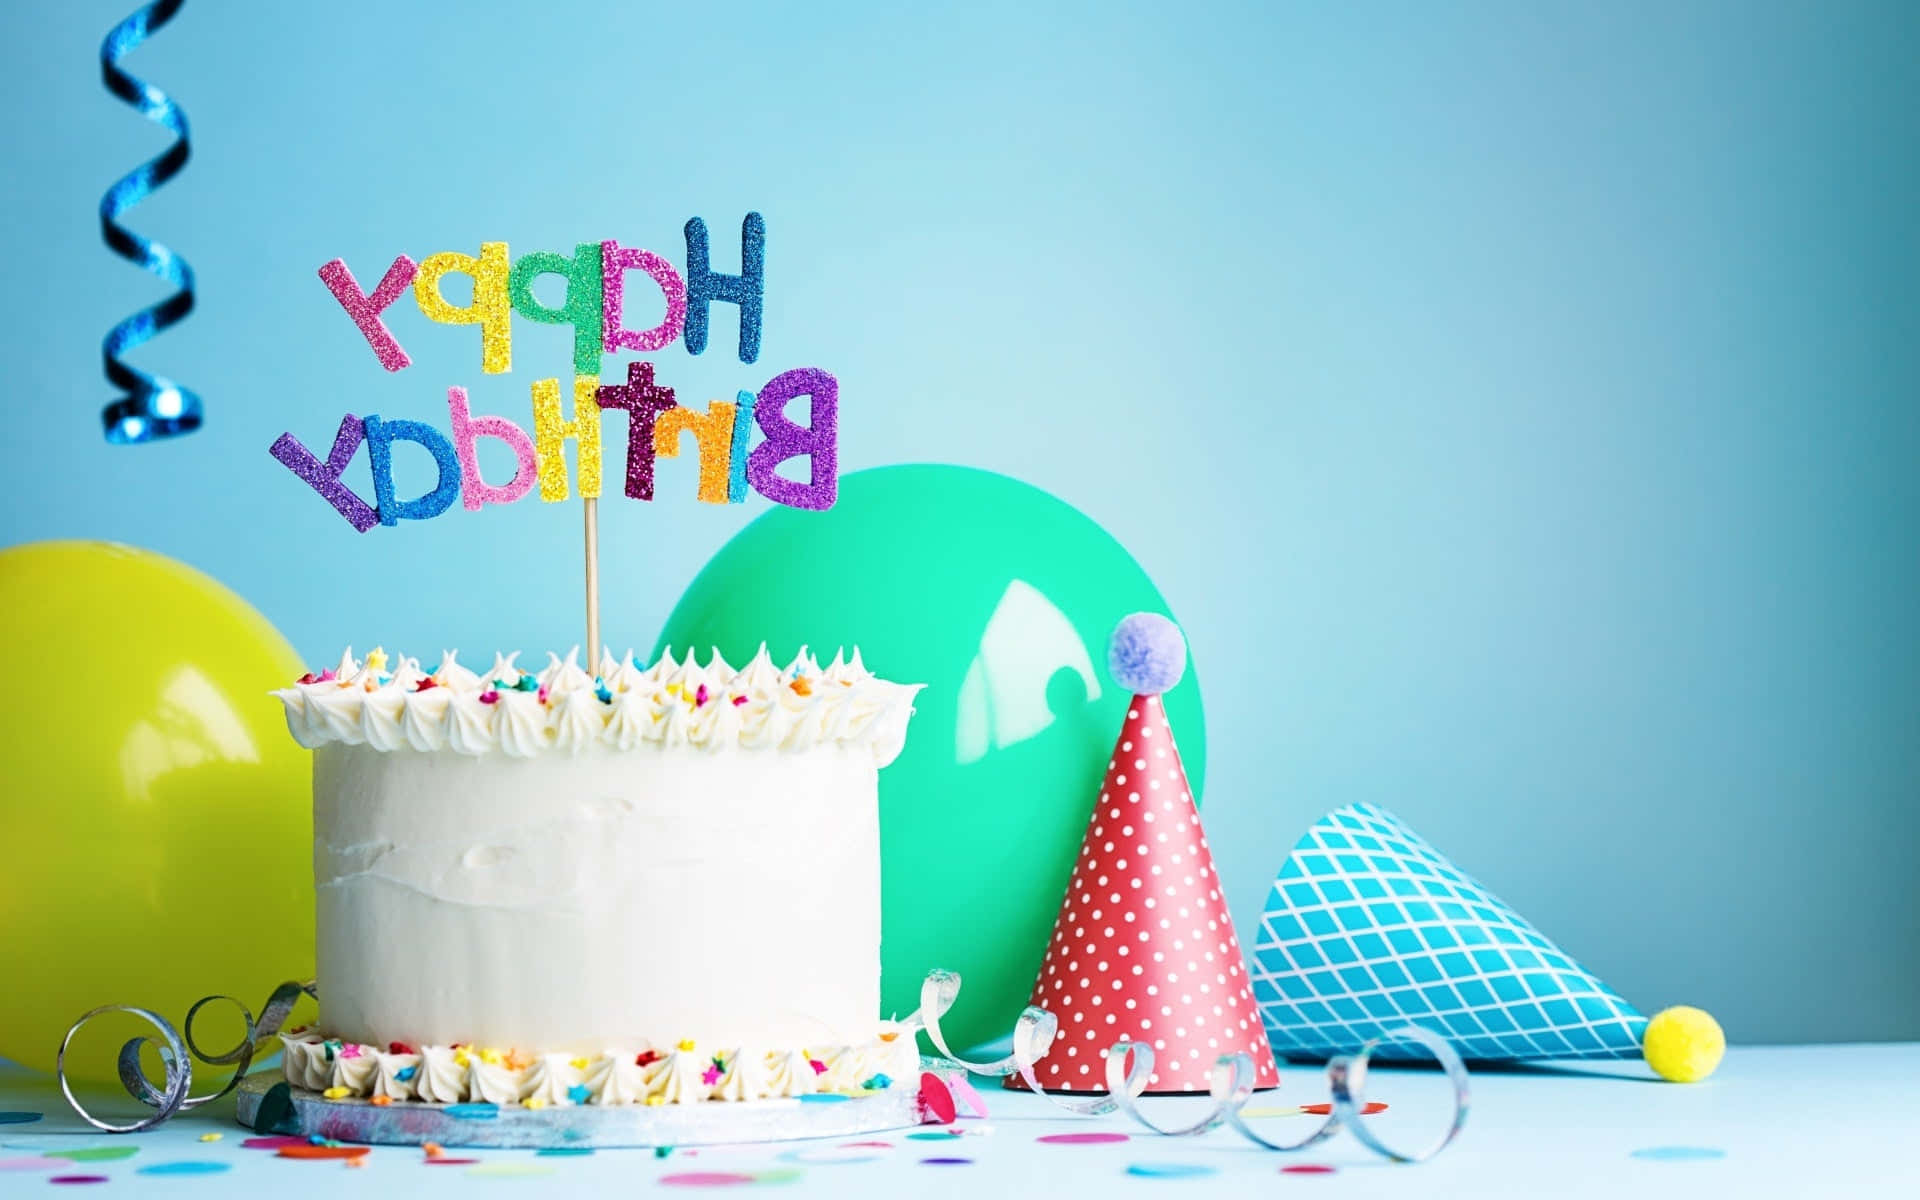 A colorful and delicious birthday cake on a bright table setting